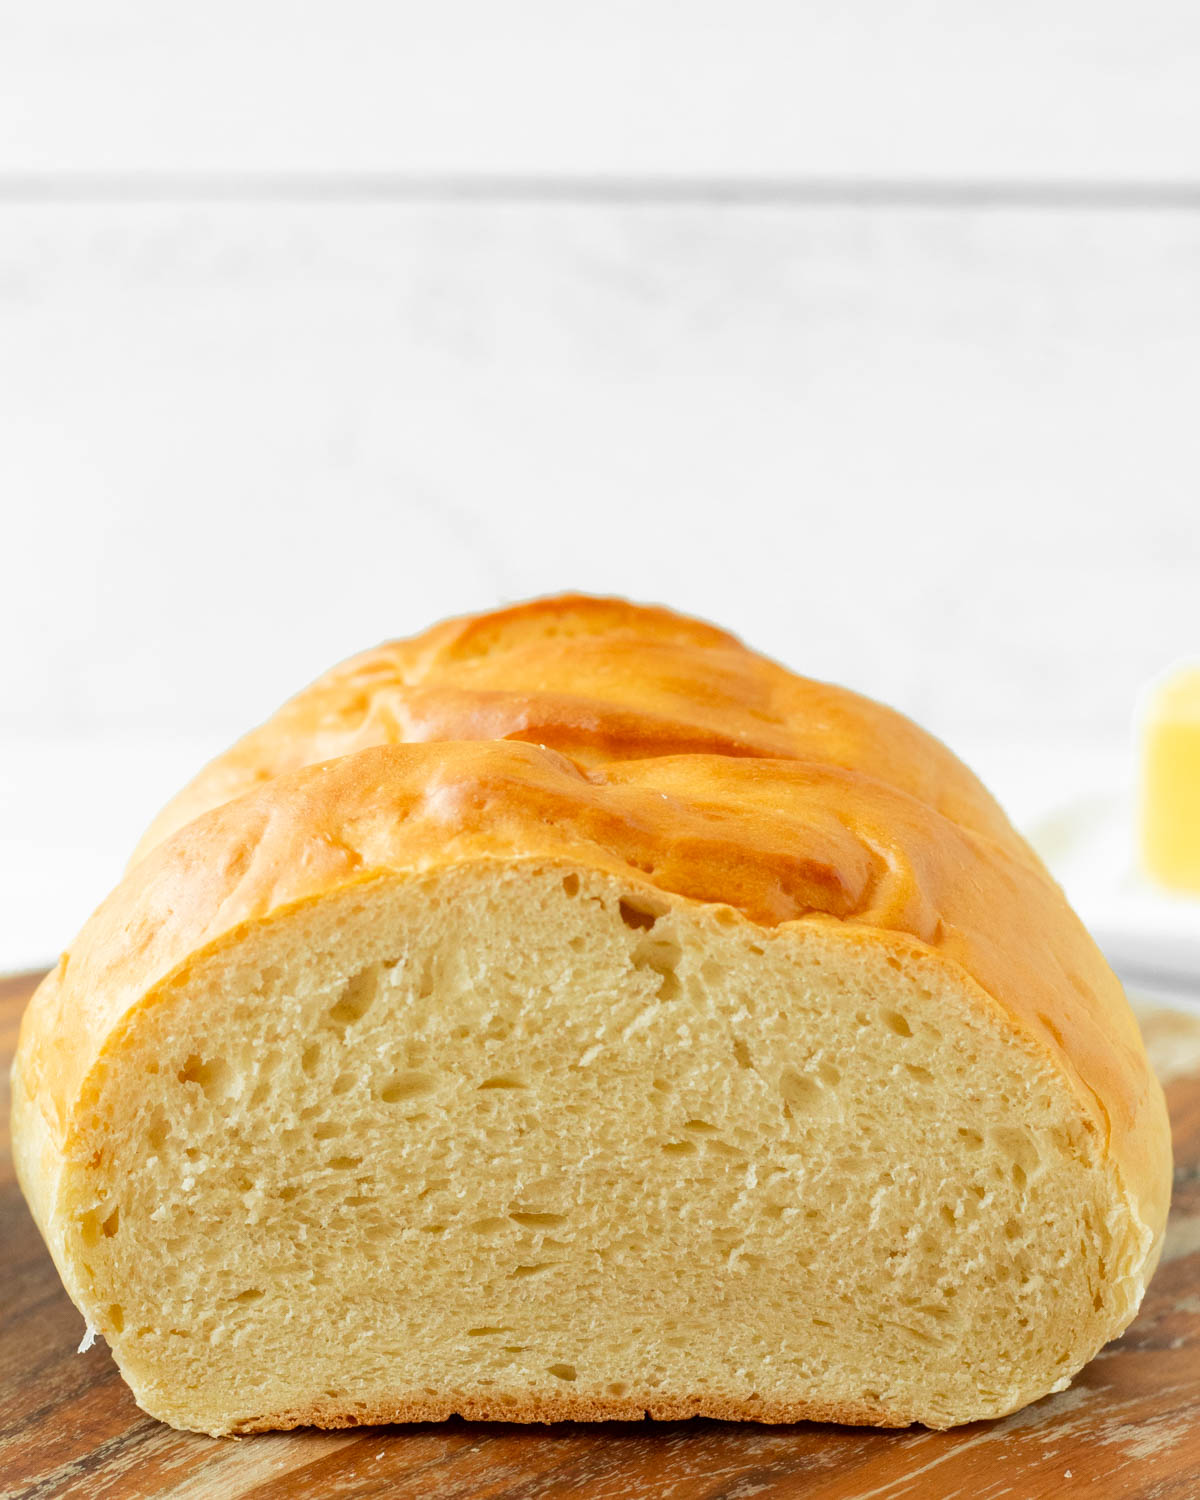 This homemade Italian bread recipe is an easy yeast bread recipe made with simple ingredients for a flavorful, soft bread perfect for using in French toast, sandwiches like grilled cheese, and making into garlic bread.